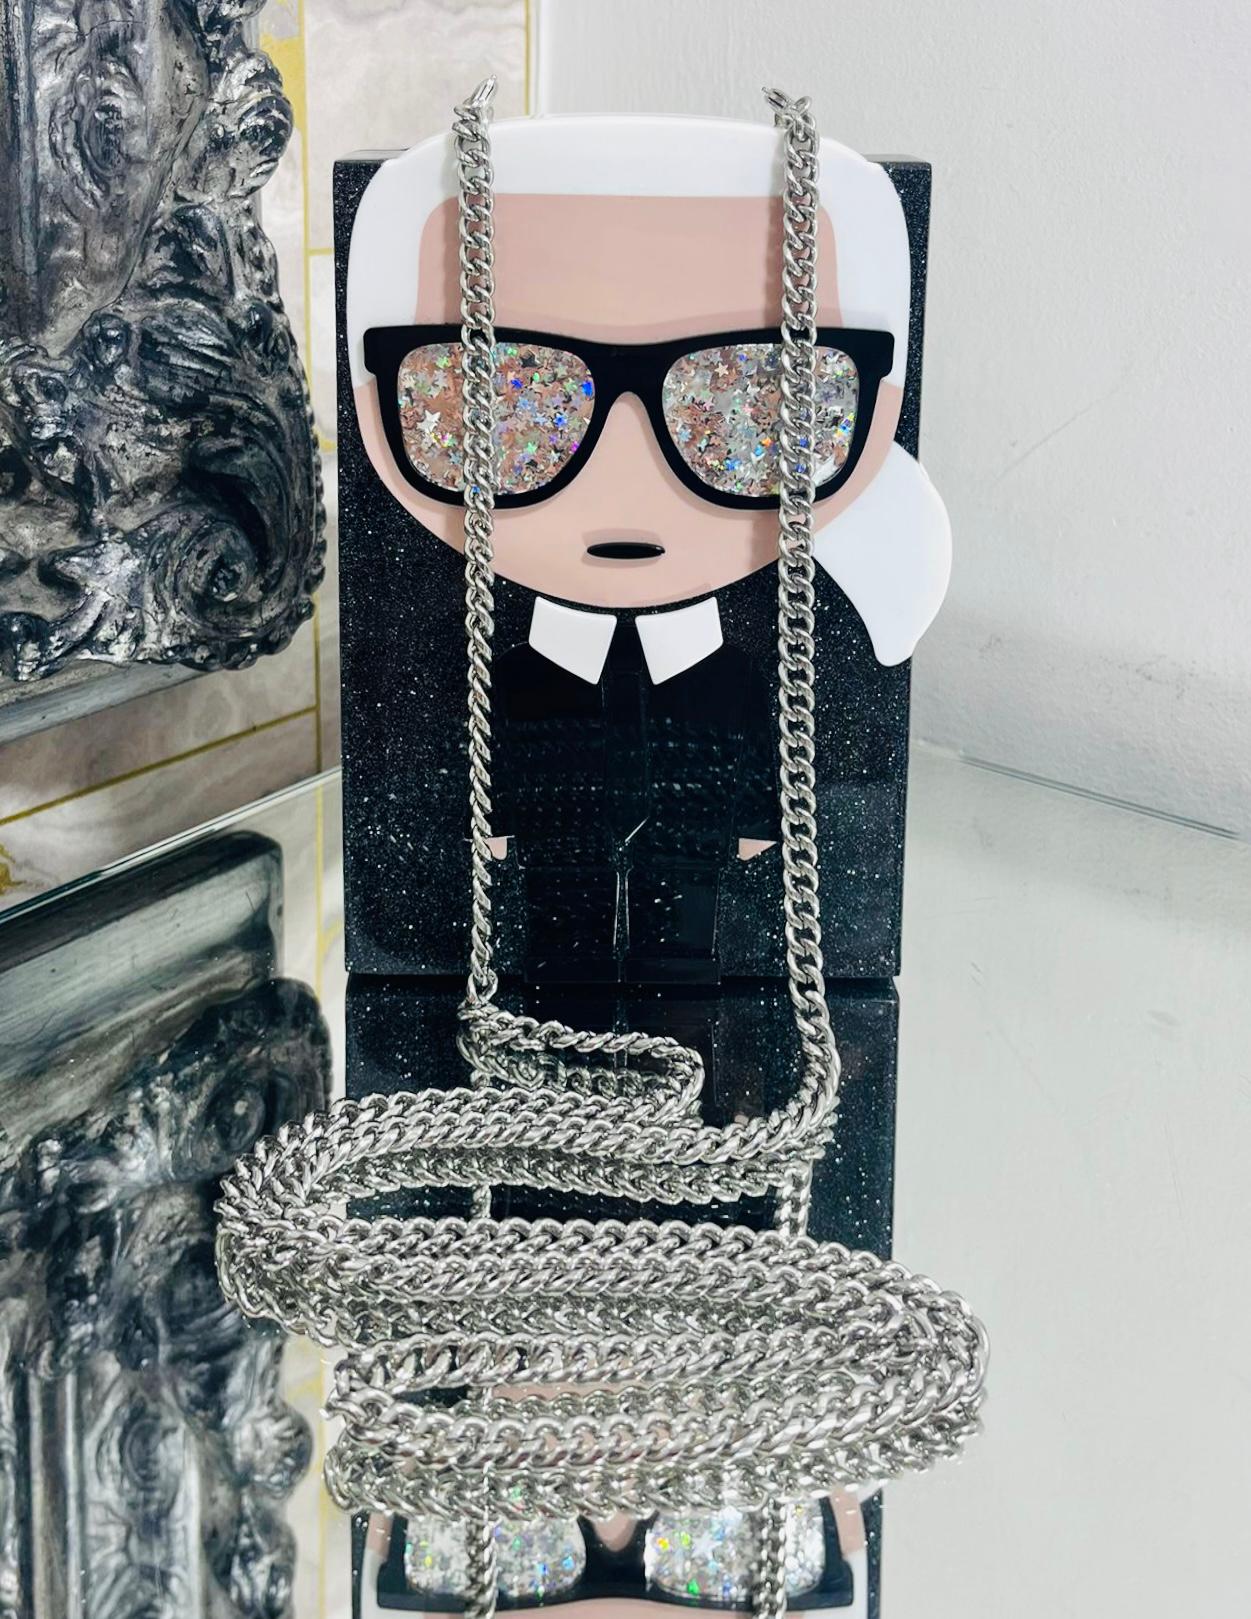 Karl Lagerfeld Acrylic Ikonik Karl Crossbody Bag

Black, rectangular shaped crossbody bag designed with Karl Lagerfeld silhouette.

Featuring silver, glitter sunglasses detail and hinged structure.

Detailed with silver chain shoulder strap and main